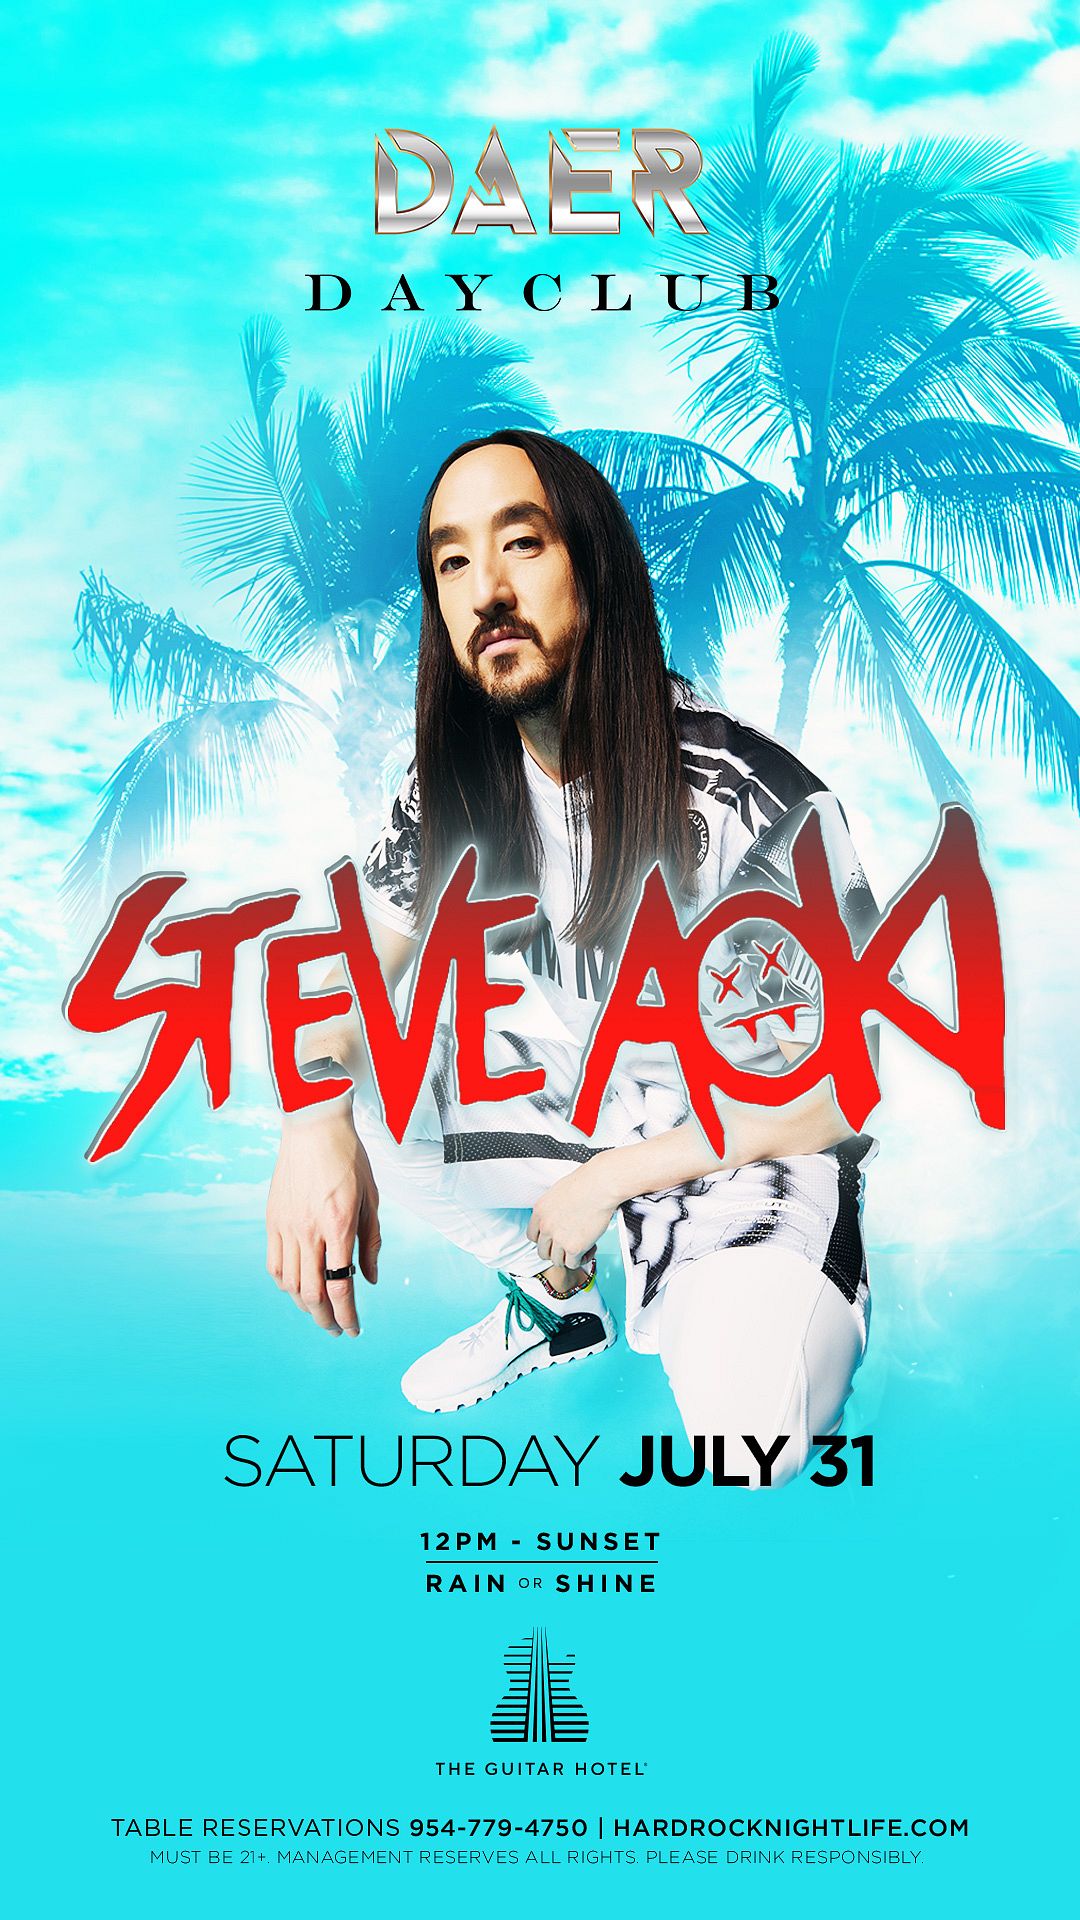 Steve Aoki Tickets at DAER South Florida in Hollywood by DAER